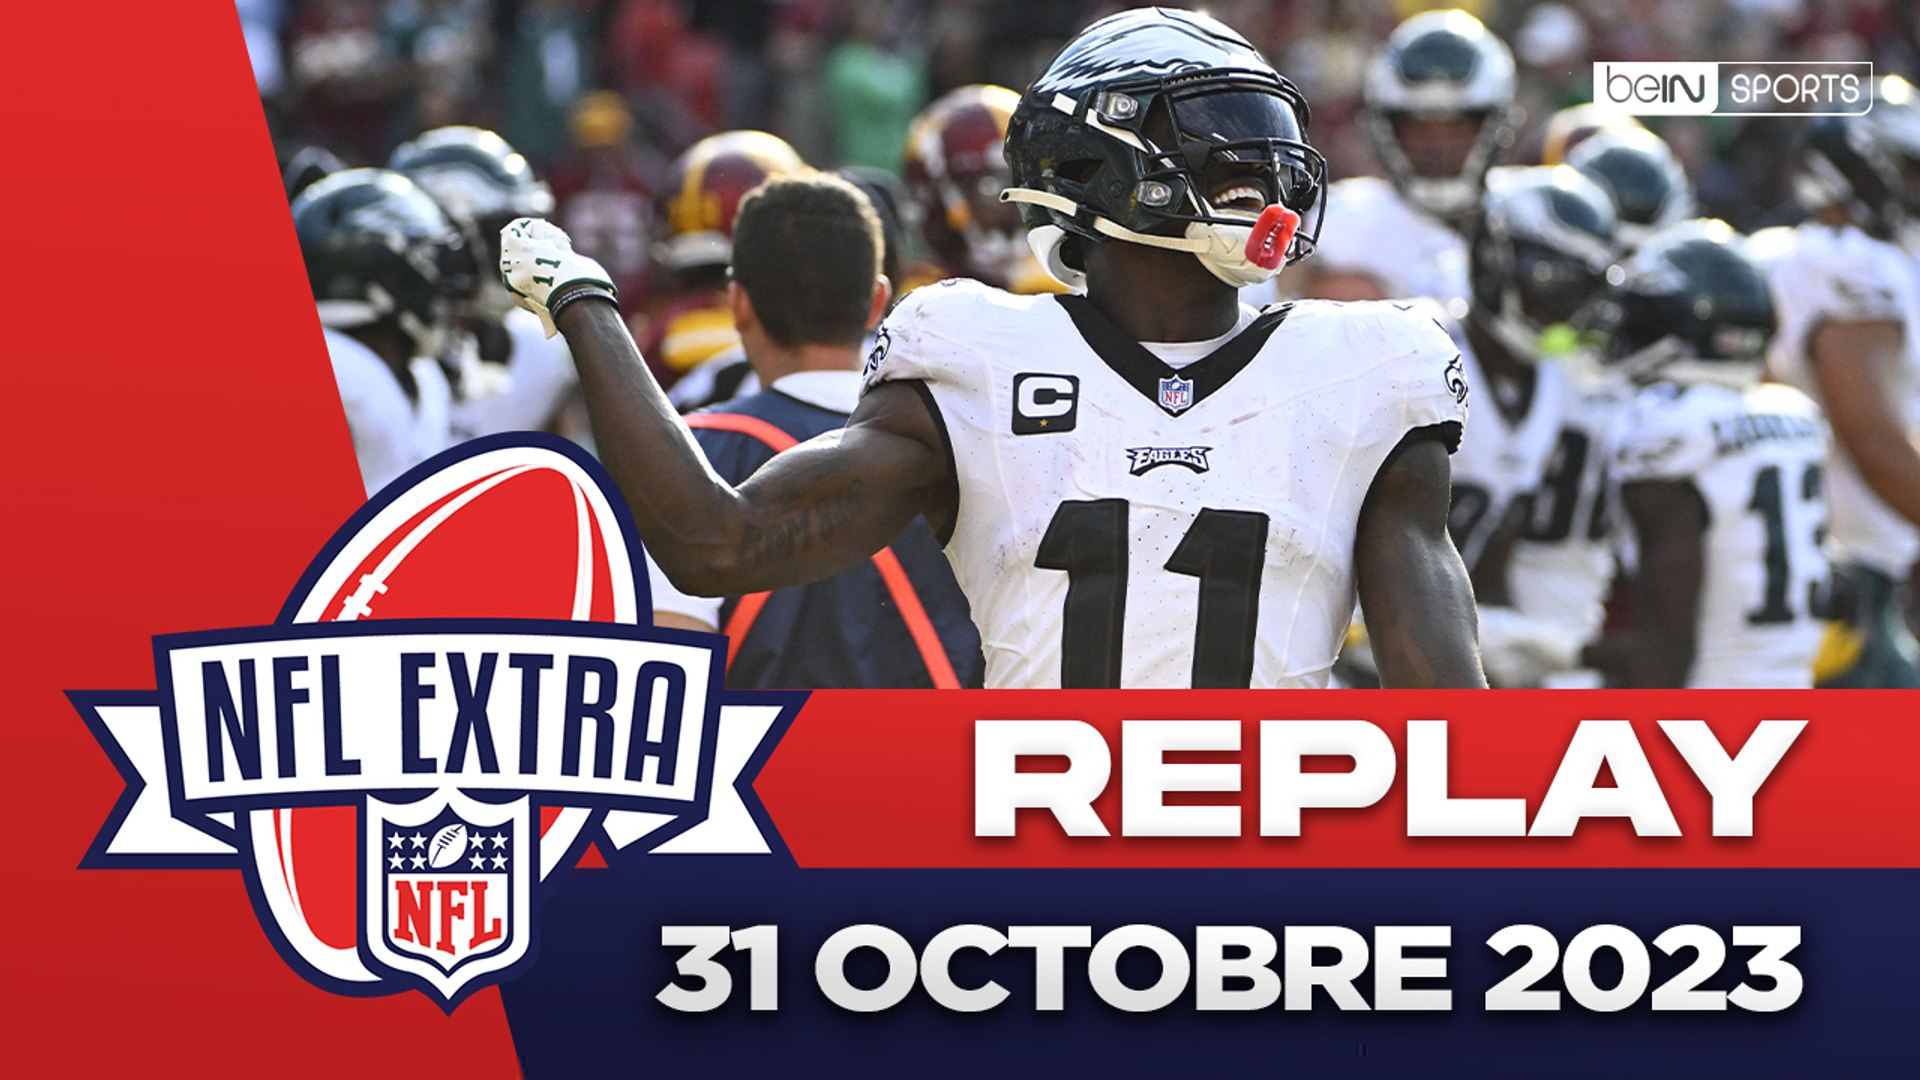 Replay - NFL Extra (31/10) : A.J. Brown dans la course au MVP | beIN SPORTS